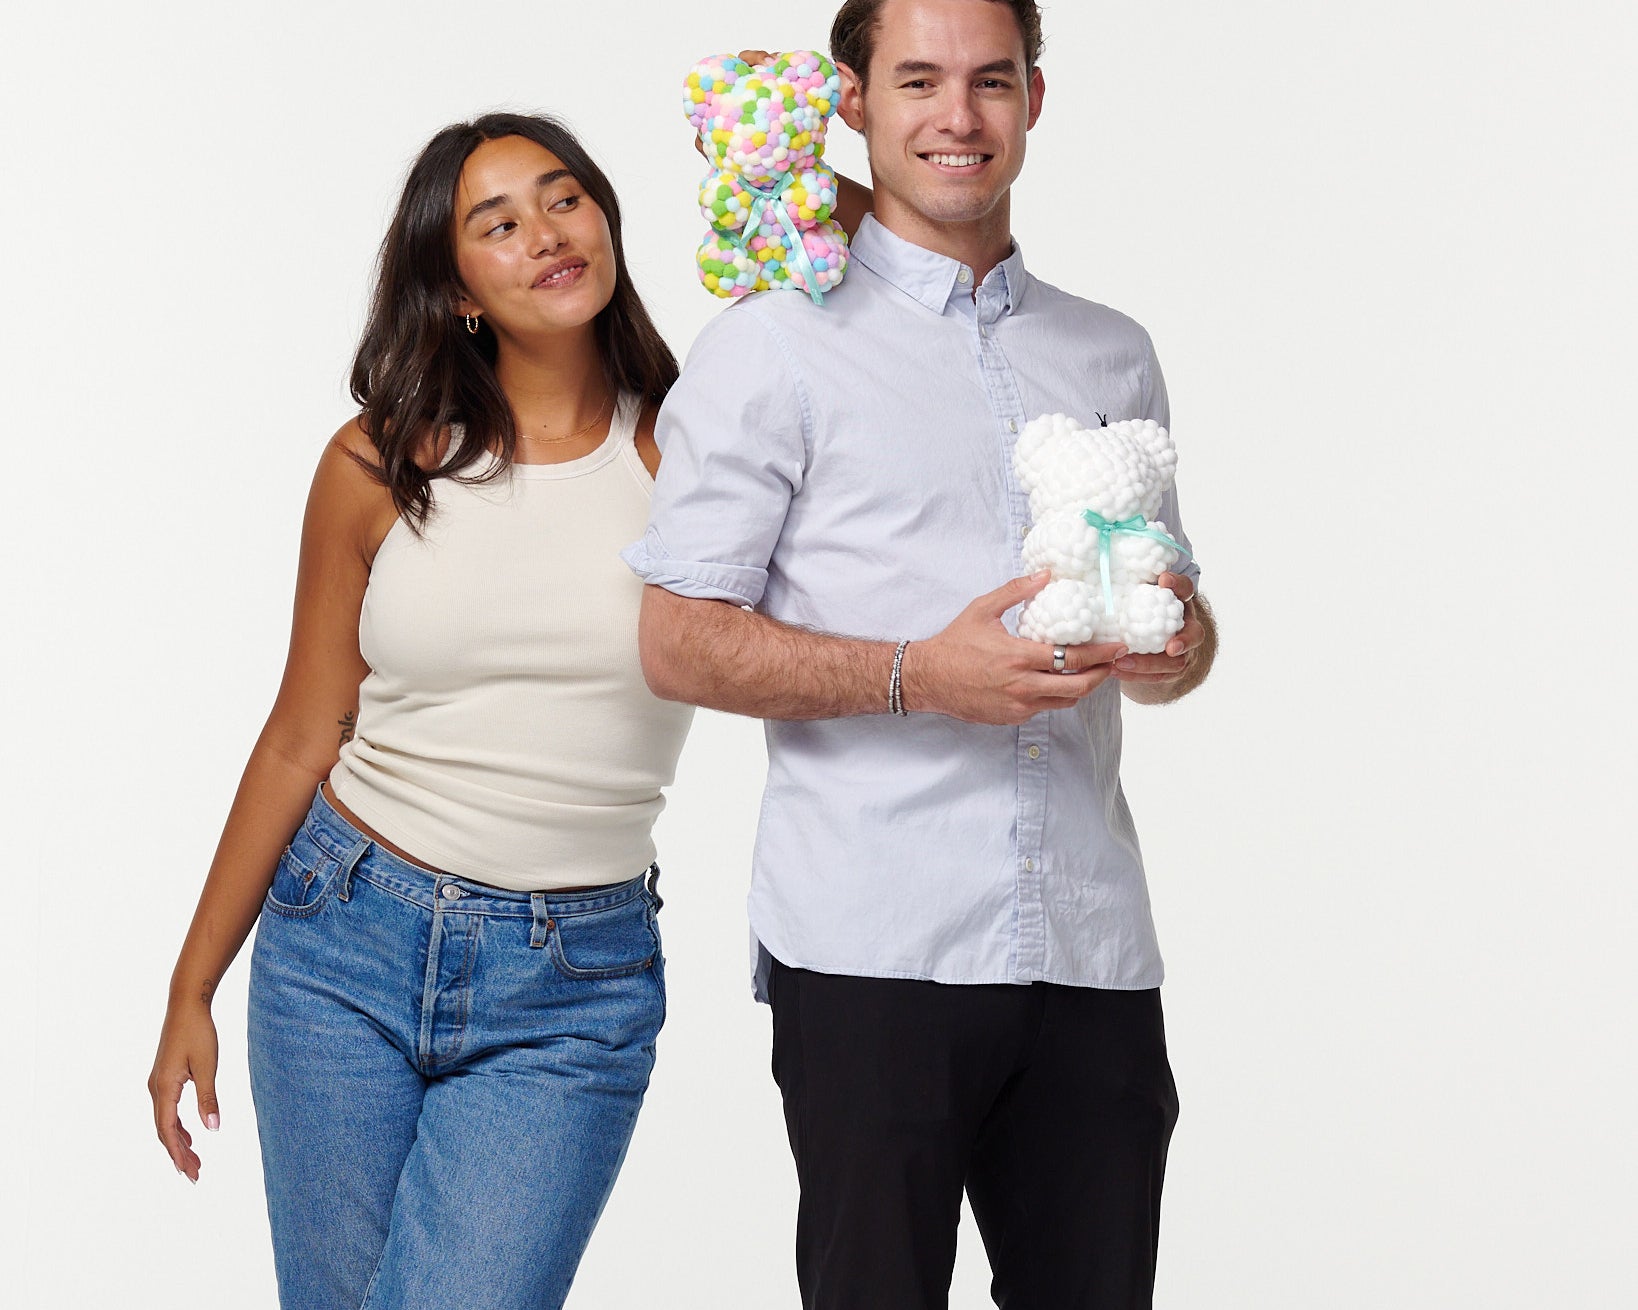 A man and woman stand together smiling; the man holds a white flower bear, and the woman rests her head on his shoulder, holding a colorful flower bear behind his head. They're casually dressed, the man in a buttoned shirt and slacks, and the woman in a tank top and jeans.